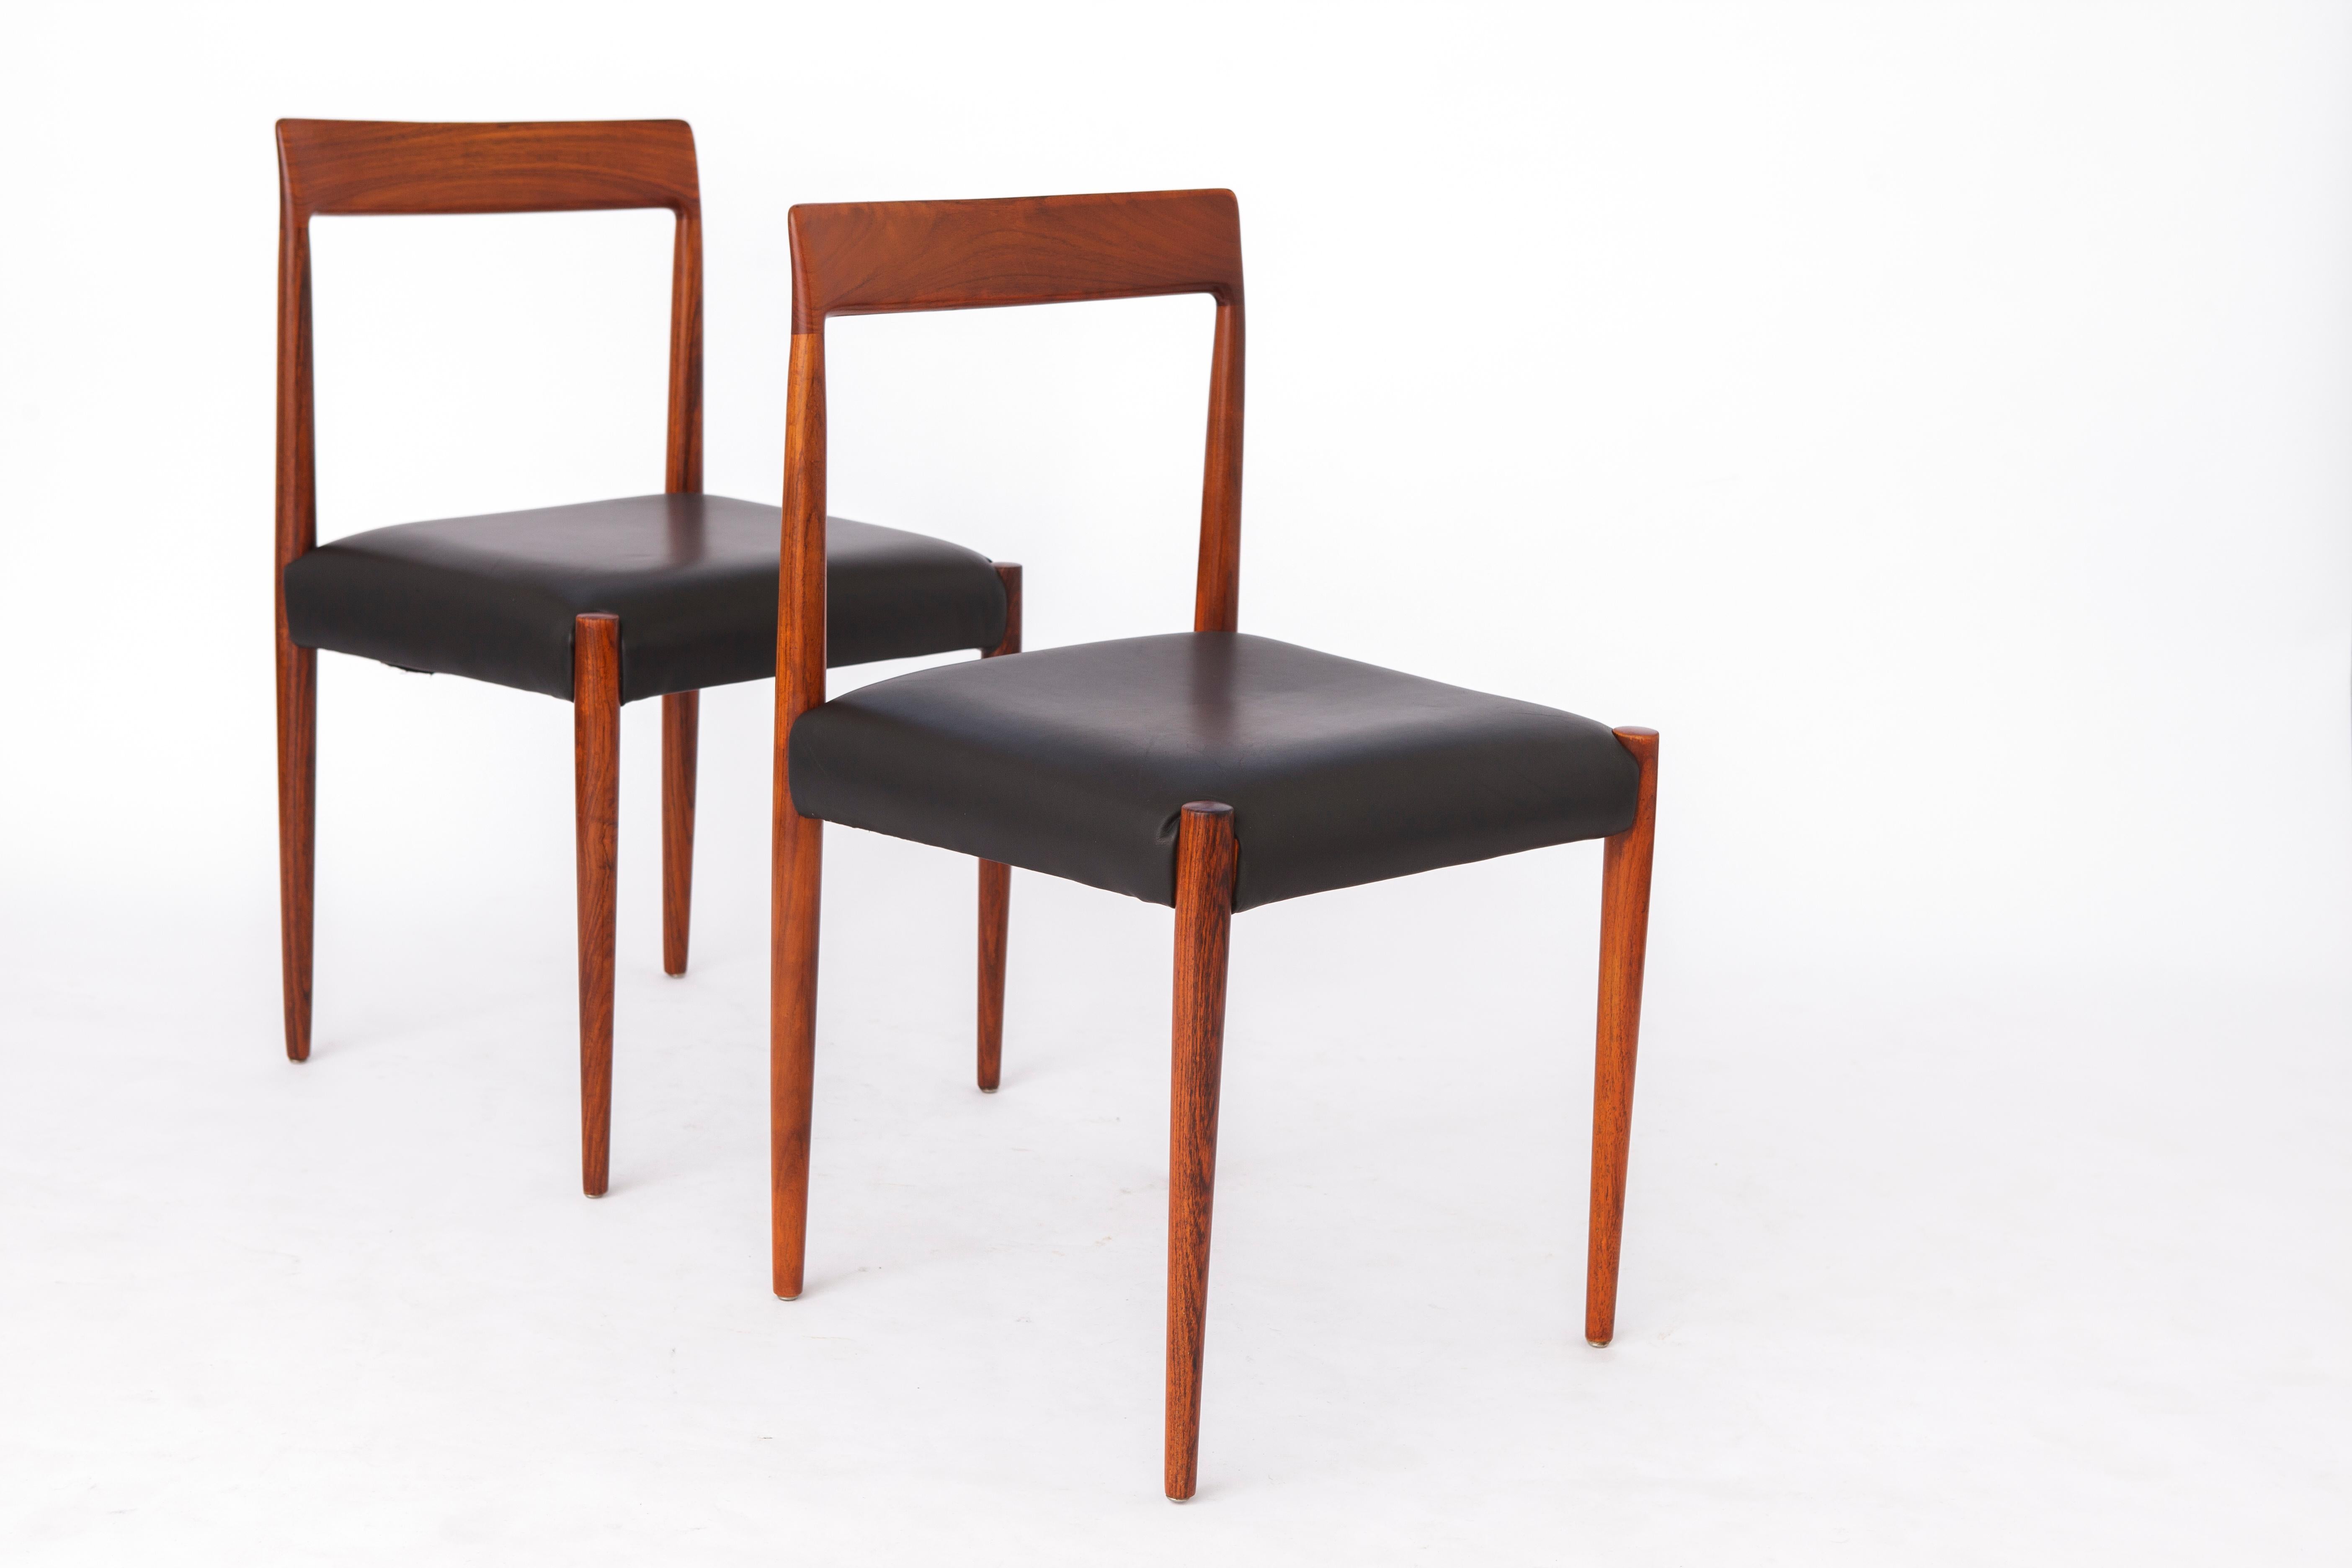 Two vintage dining chairs by manufacturer Lübke, Germany. 
Production period: 1960s. 
Displayed price is for a pair. 

Very good condition. Stable teak wood frame. Refurbished and oiled. 
Original black leather cover in very good condition. Treated